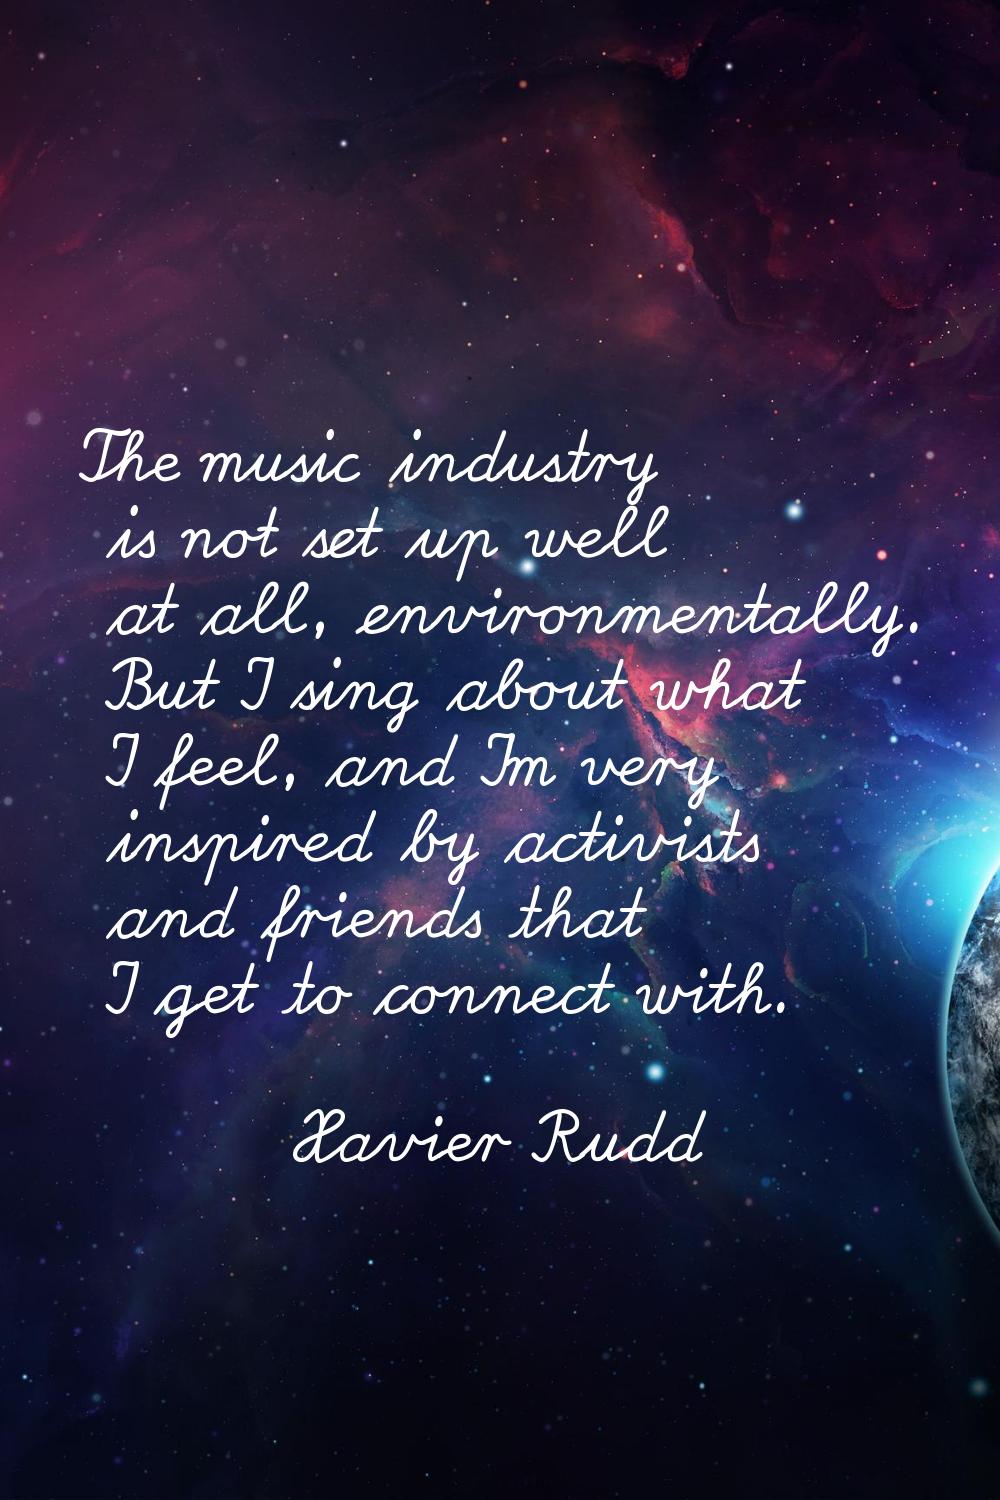 The music industry is not set up well at all, environmentally. But I sing about what I feel, and I'